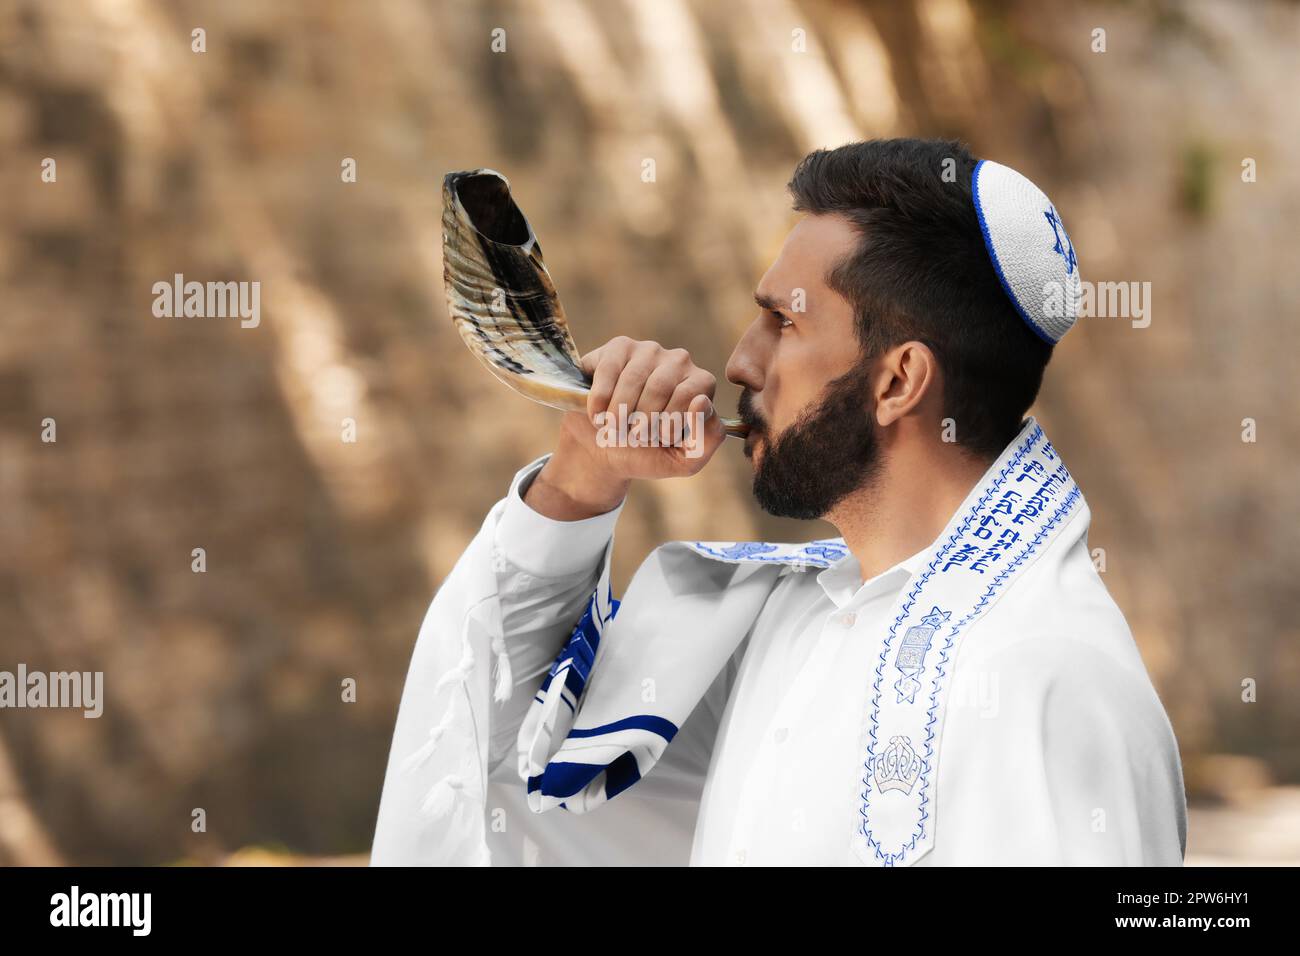 Jewish man blowing shofar on Rosh Hashanah outdoors. Wearing tallit with words Blessed Are You, Lord Our God, King Of The Universe, Who Has Sanctified Stock Photo